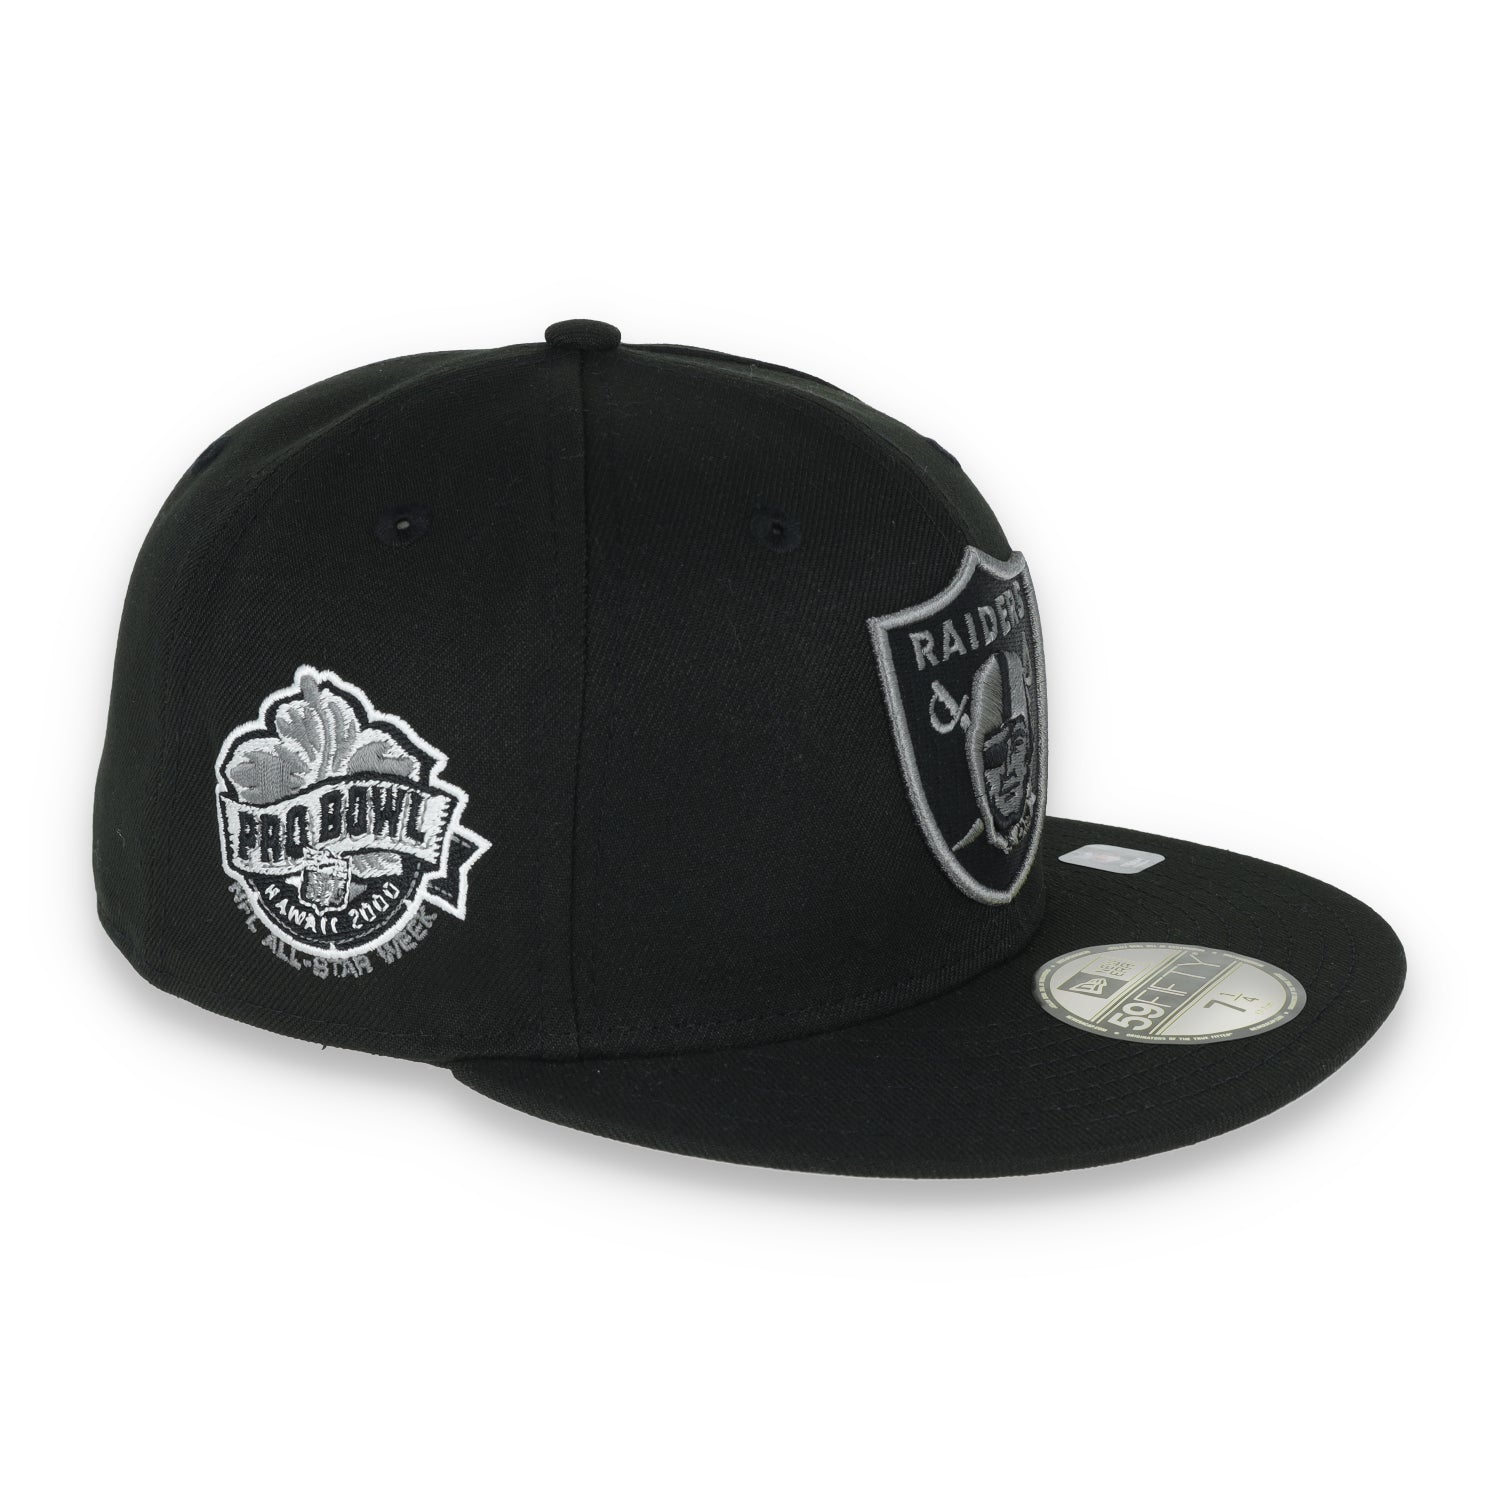 Las Vegas Raiders Shield 2000 Hawaii Pro Bowl Side Patch New Era 59Fifty Fitted-Black/Grey